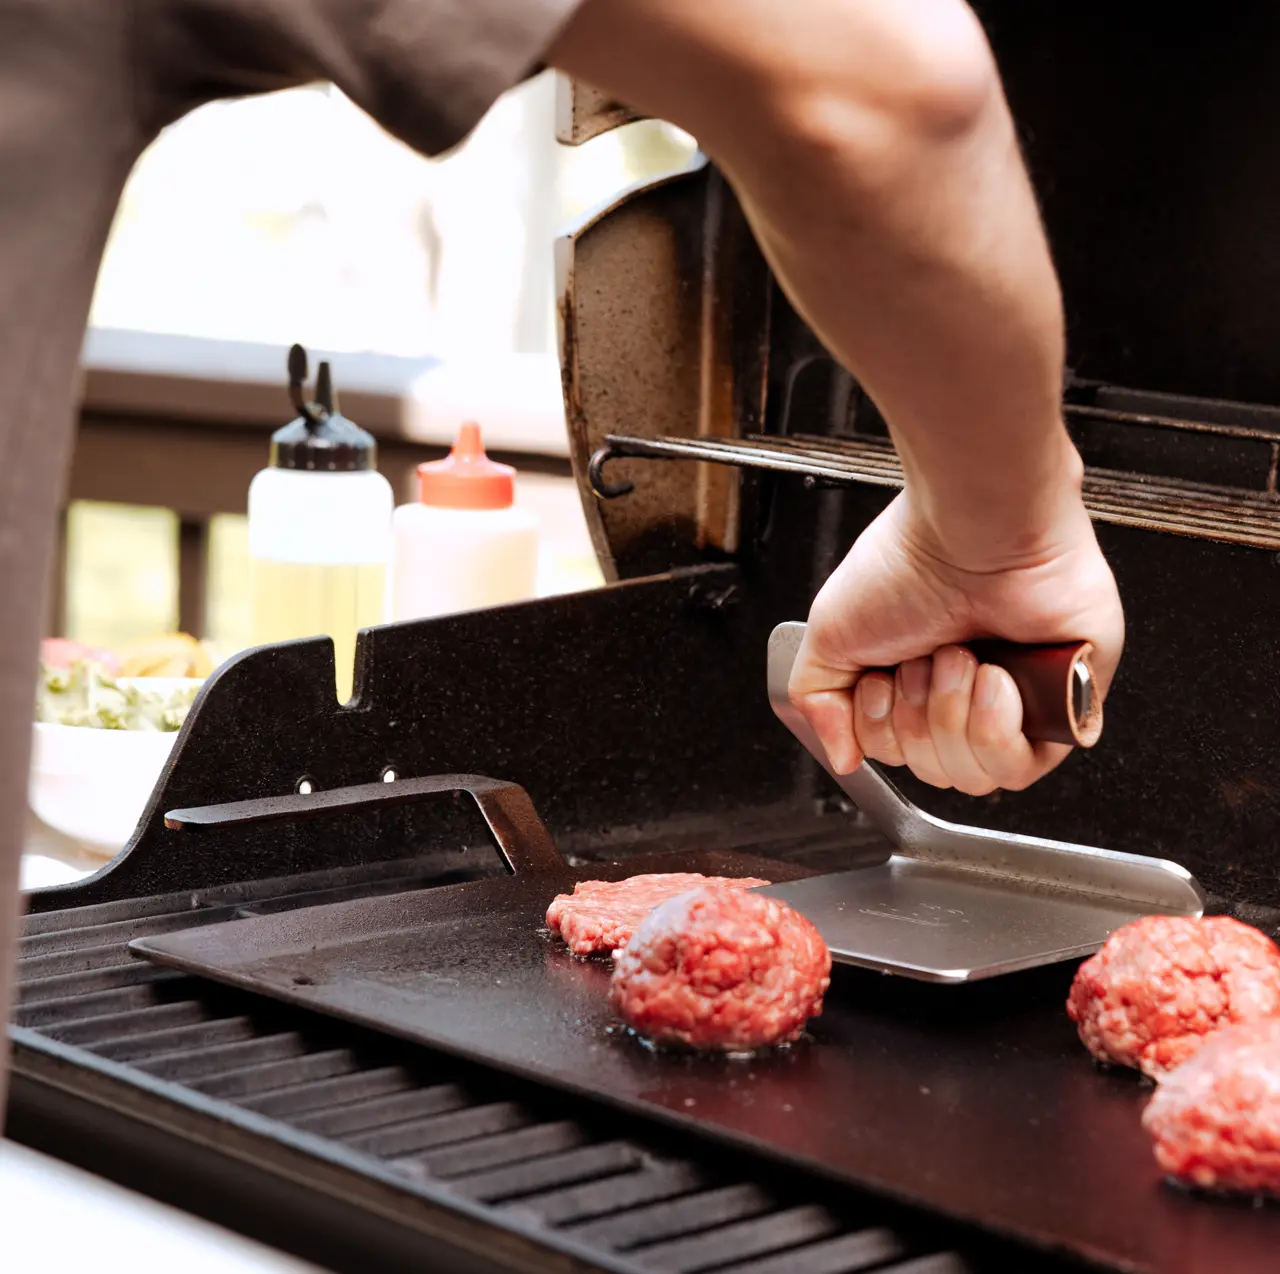 A person's arm is visible as they press down on hamburger patties with a spatula on an outdoor grill.